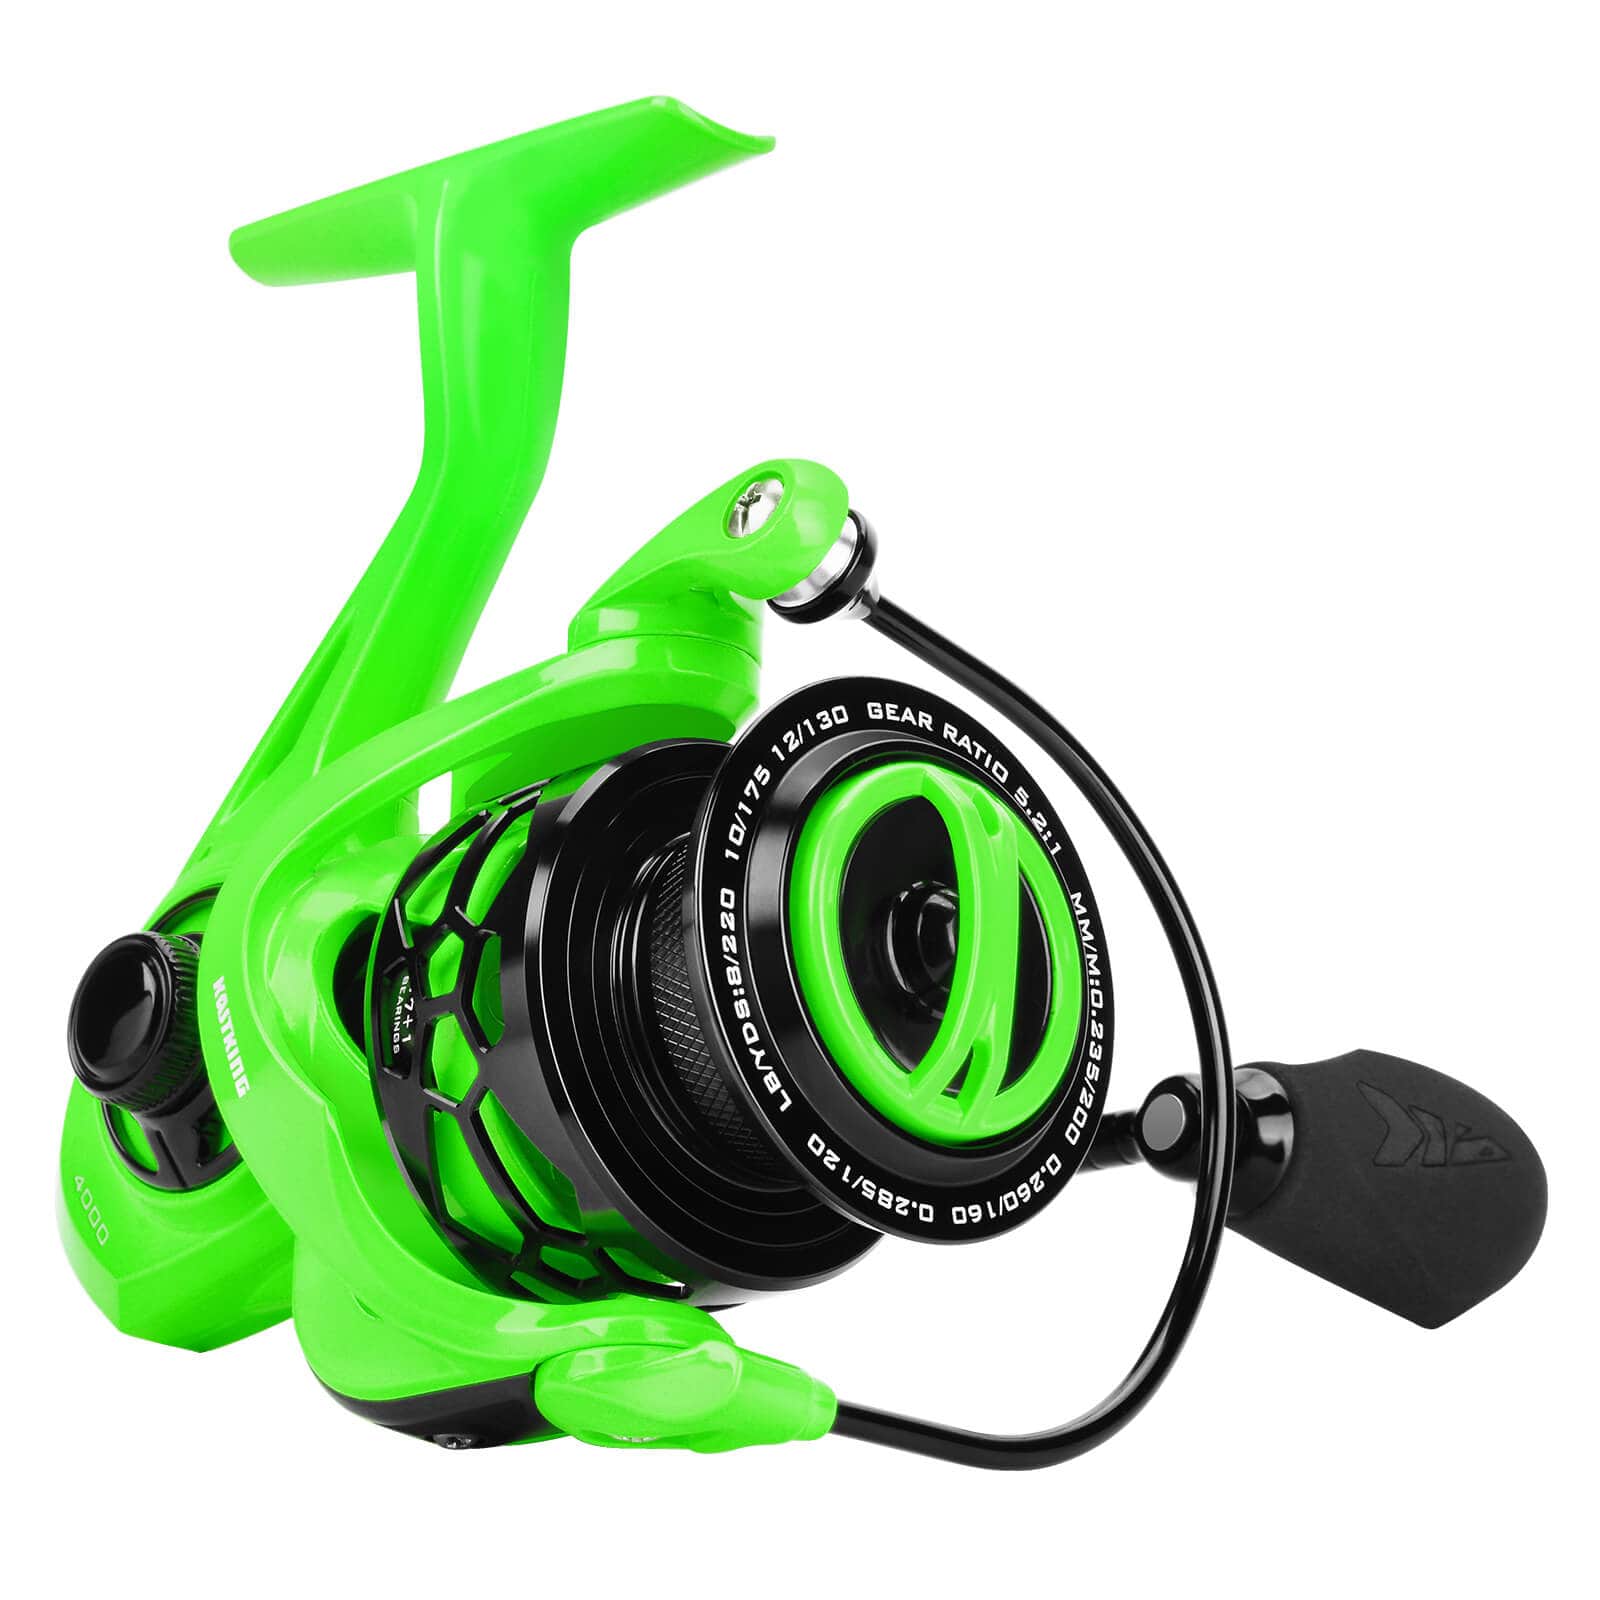 KastKing Zephyr Spinning Reel - 5.6oz - Size 500 Is Perfect for Ultralight / Ice Fishing, 7+1/6+1BB Smooth Powerful Fishing Reel